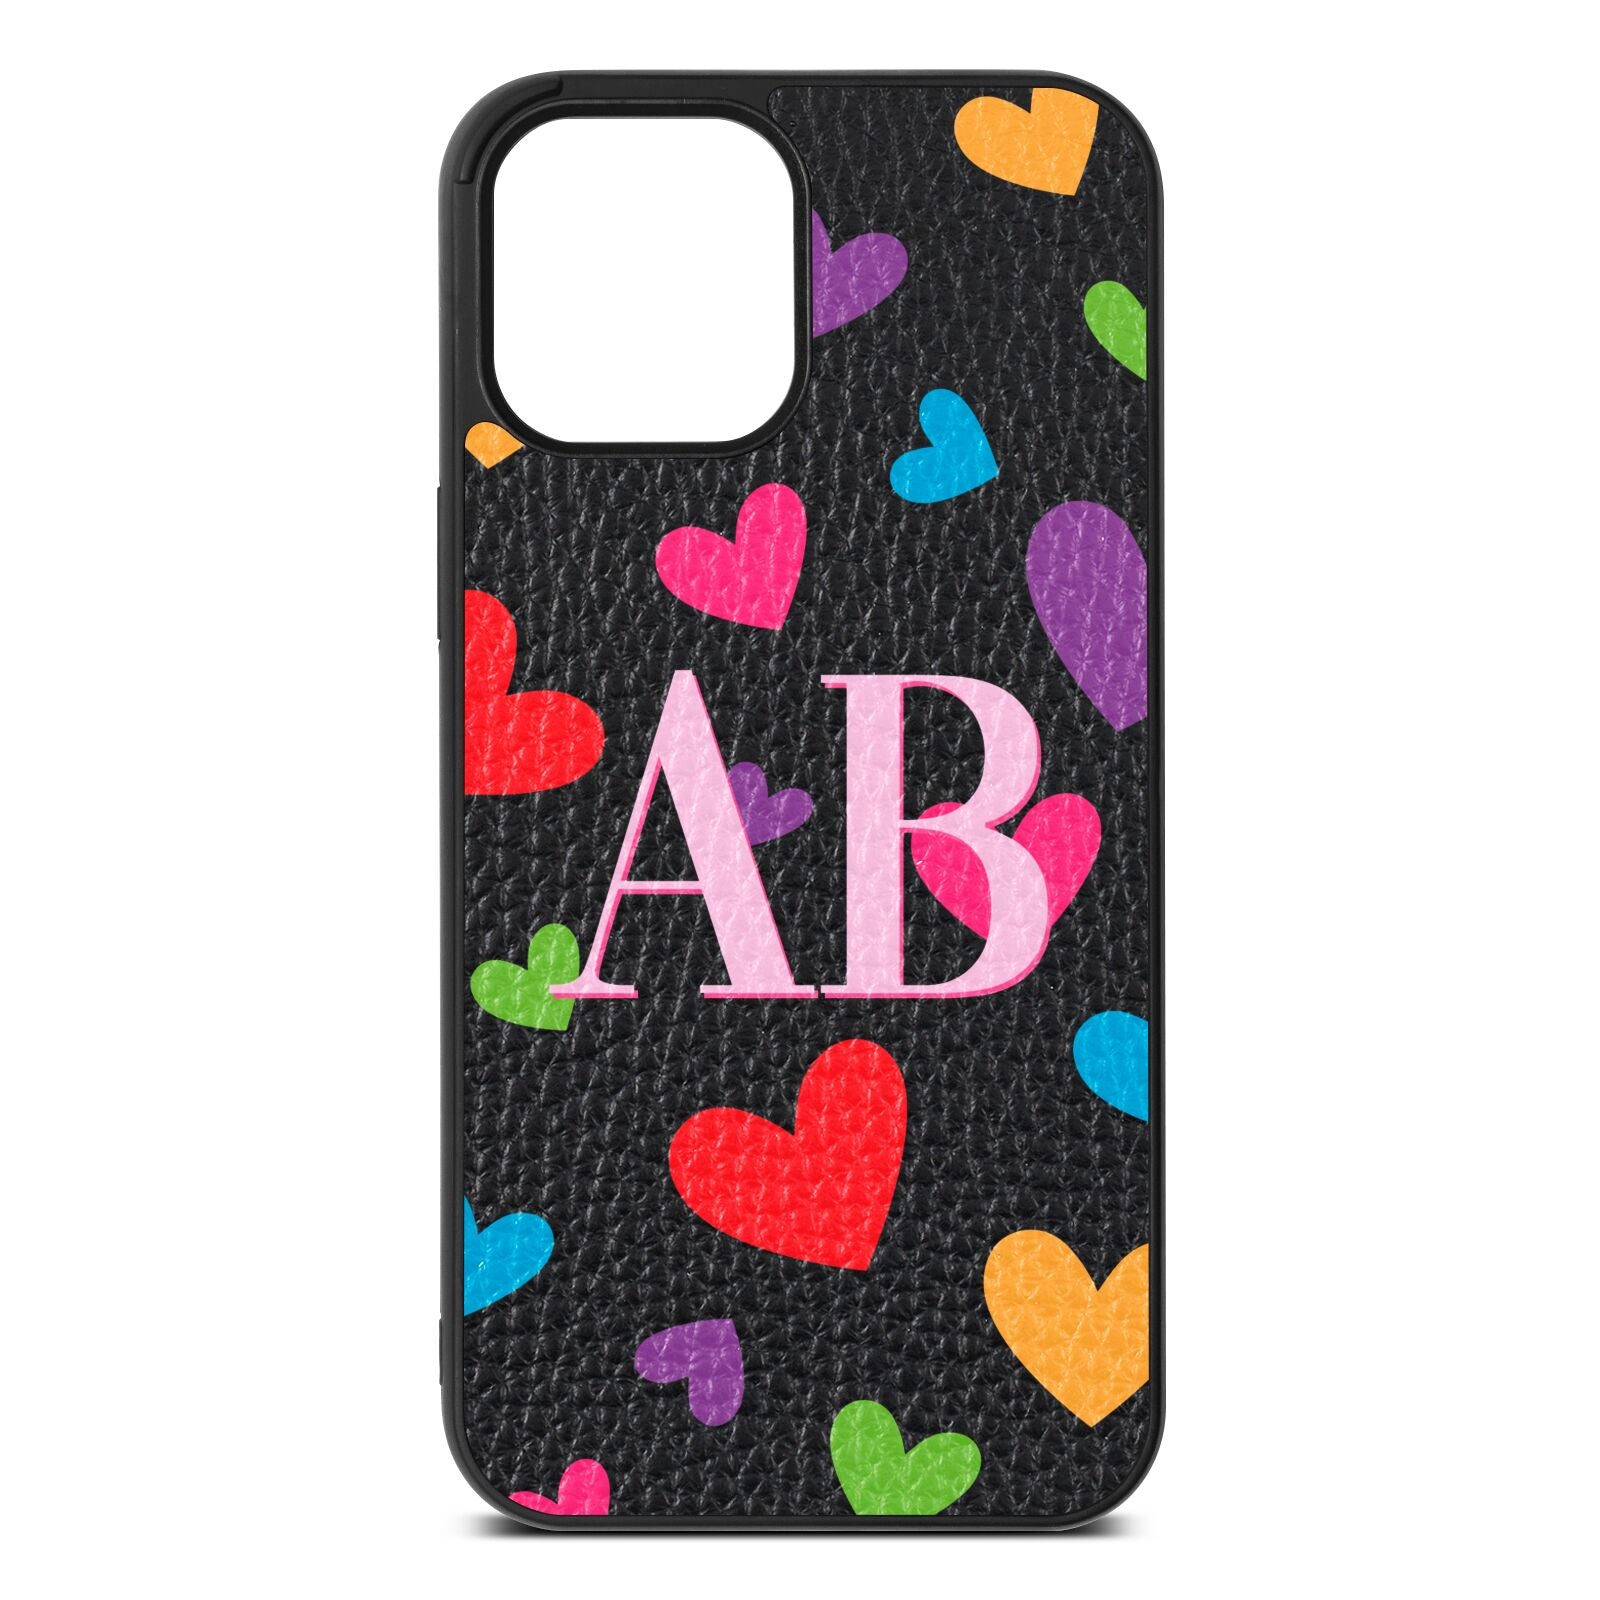 Contrast Initials Heart Print Black Pebble Leather iPhone 12 Pro Max Case